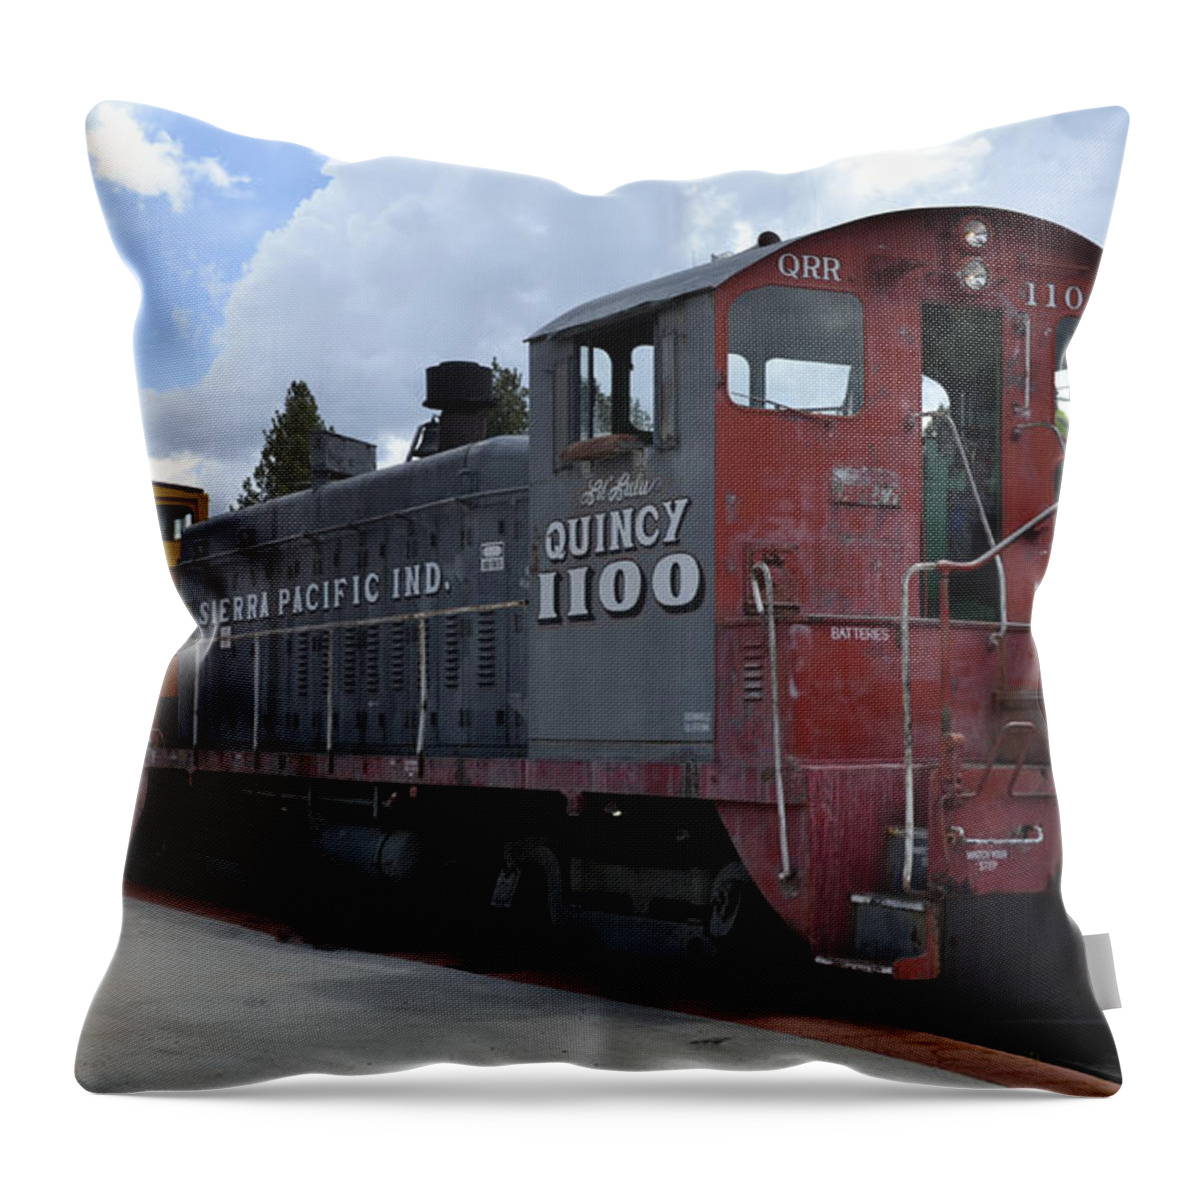 Engine Throw Pillow featuring the photograph Quincy 1100 Engine by Holly Blunkall